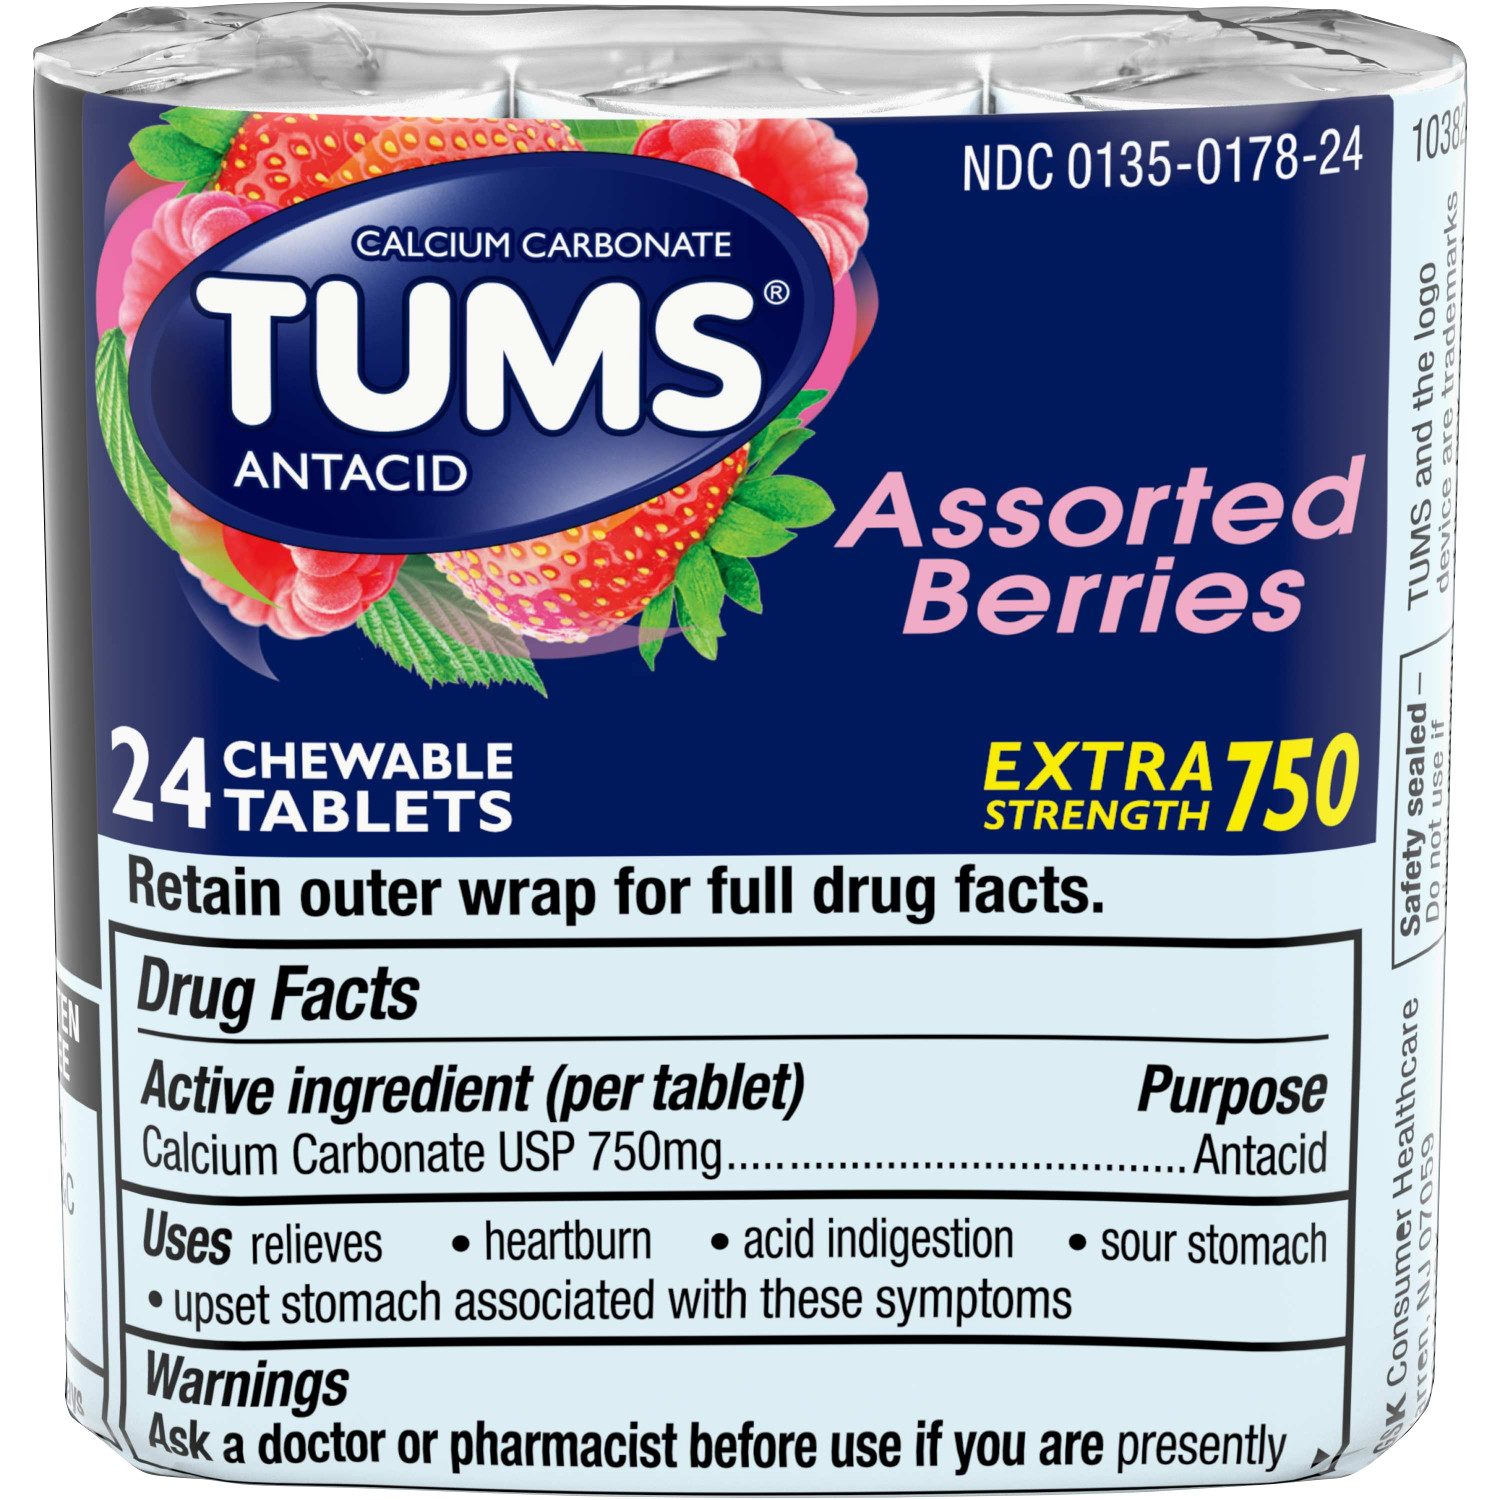 TUMS Antacid Chewable Tablets for Heartburn Relief, Extra Strength, Assorted Berries, 3-Rolls of 8 Tablets - image 1 of 11